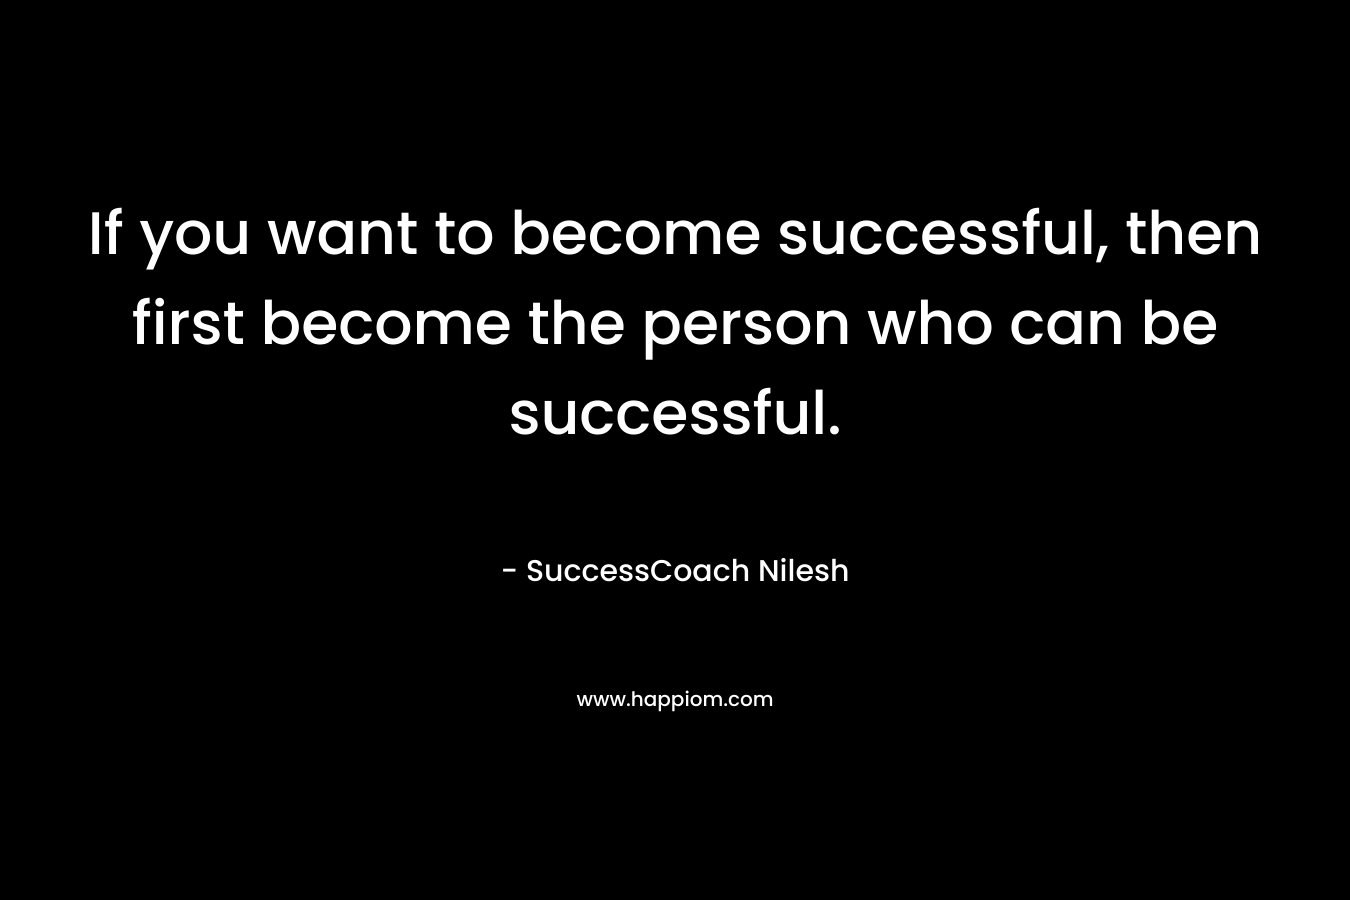 If you want to become successful, then first become the person who can be successful.